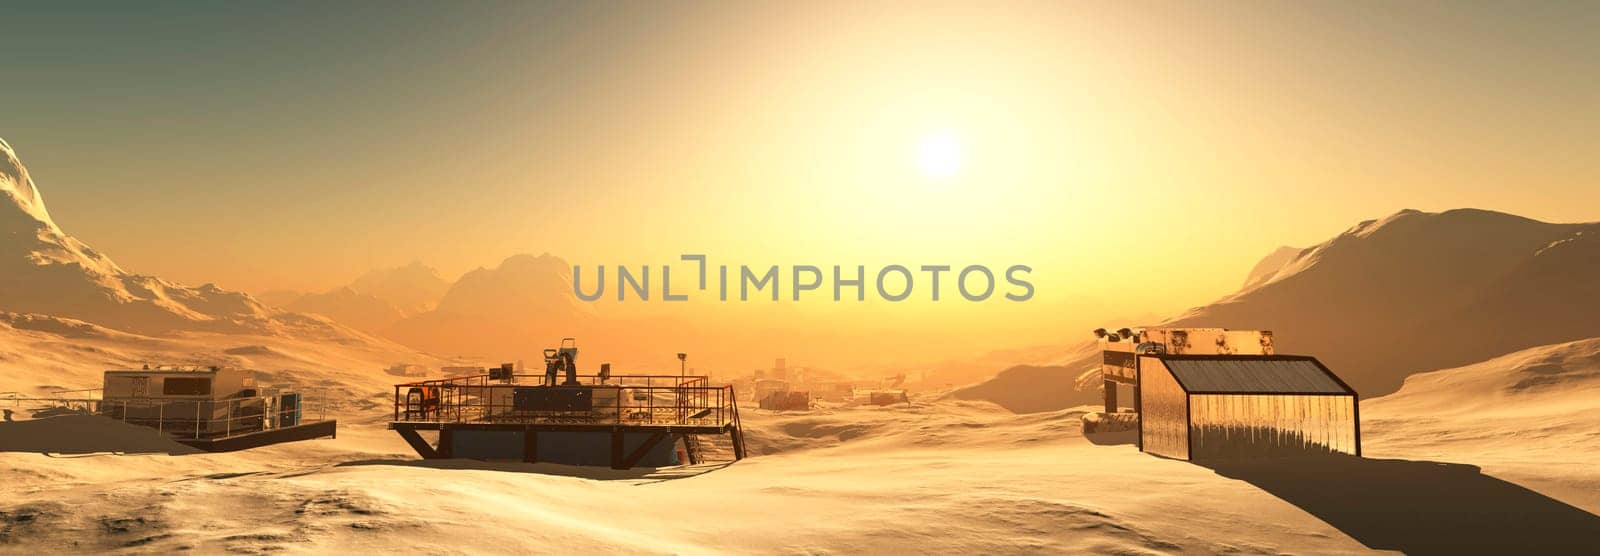 The sun rises, casting a warm glow on a scientific outpost nestled in a snowy extraterrestrial landscape